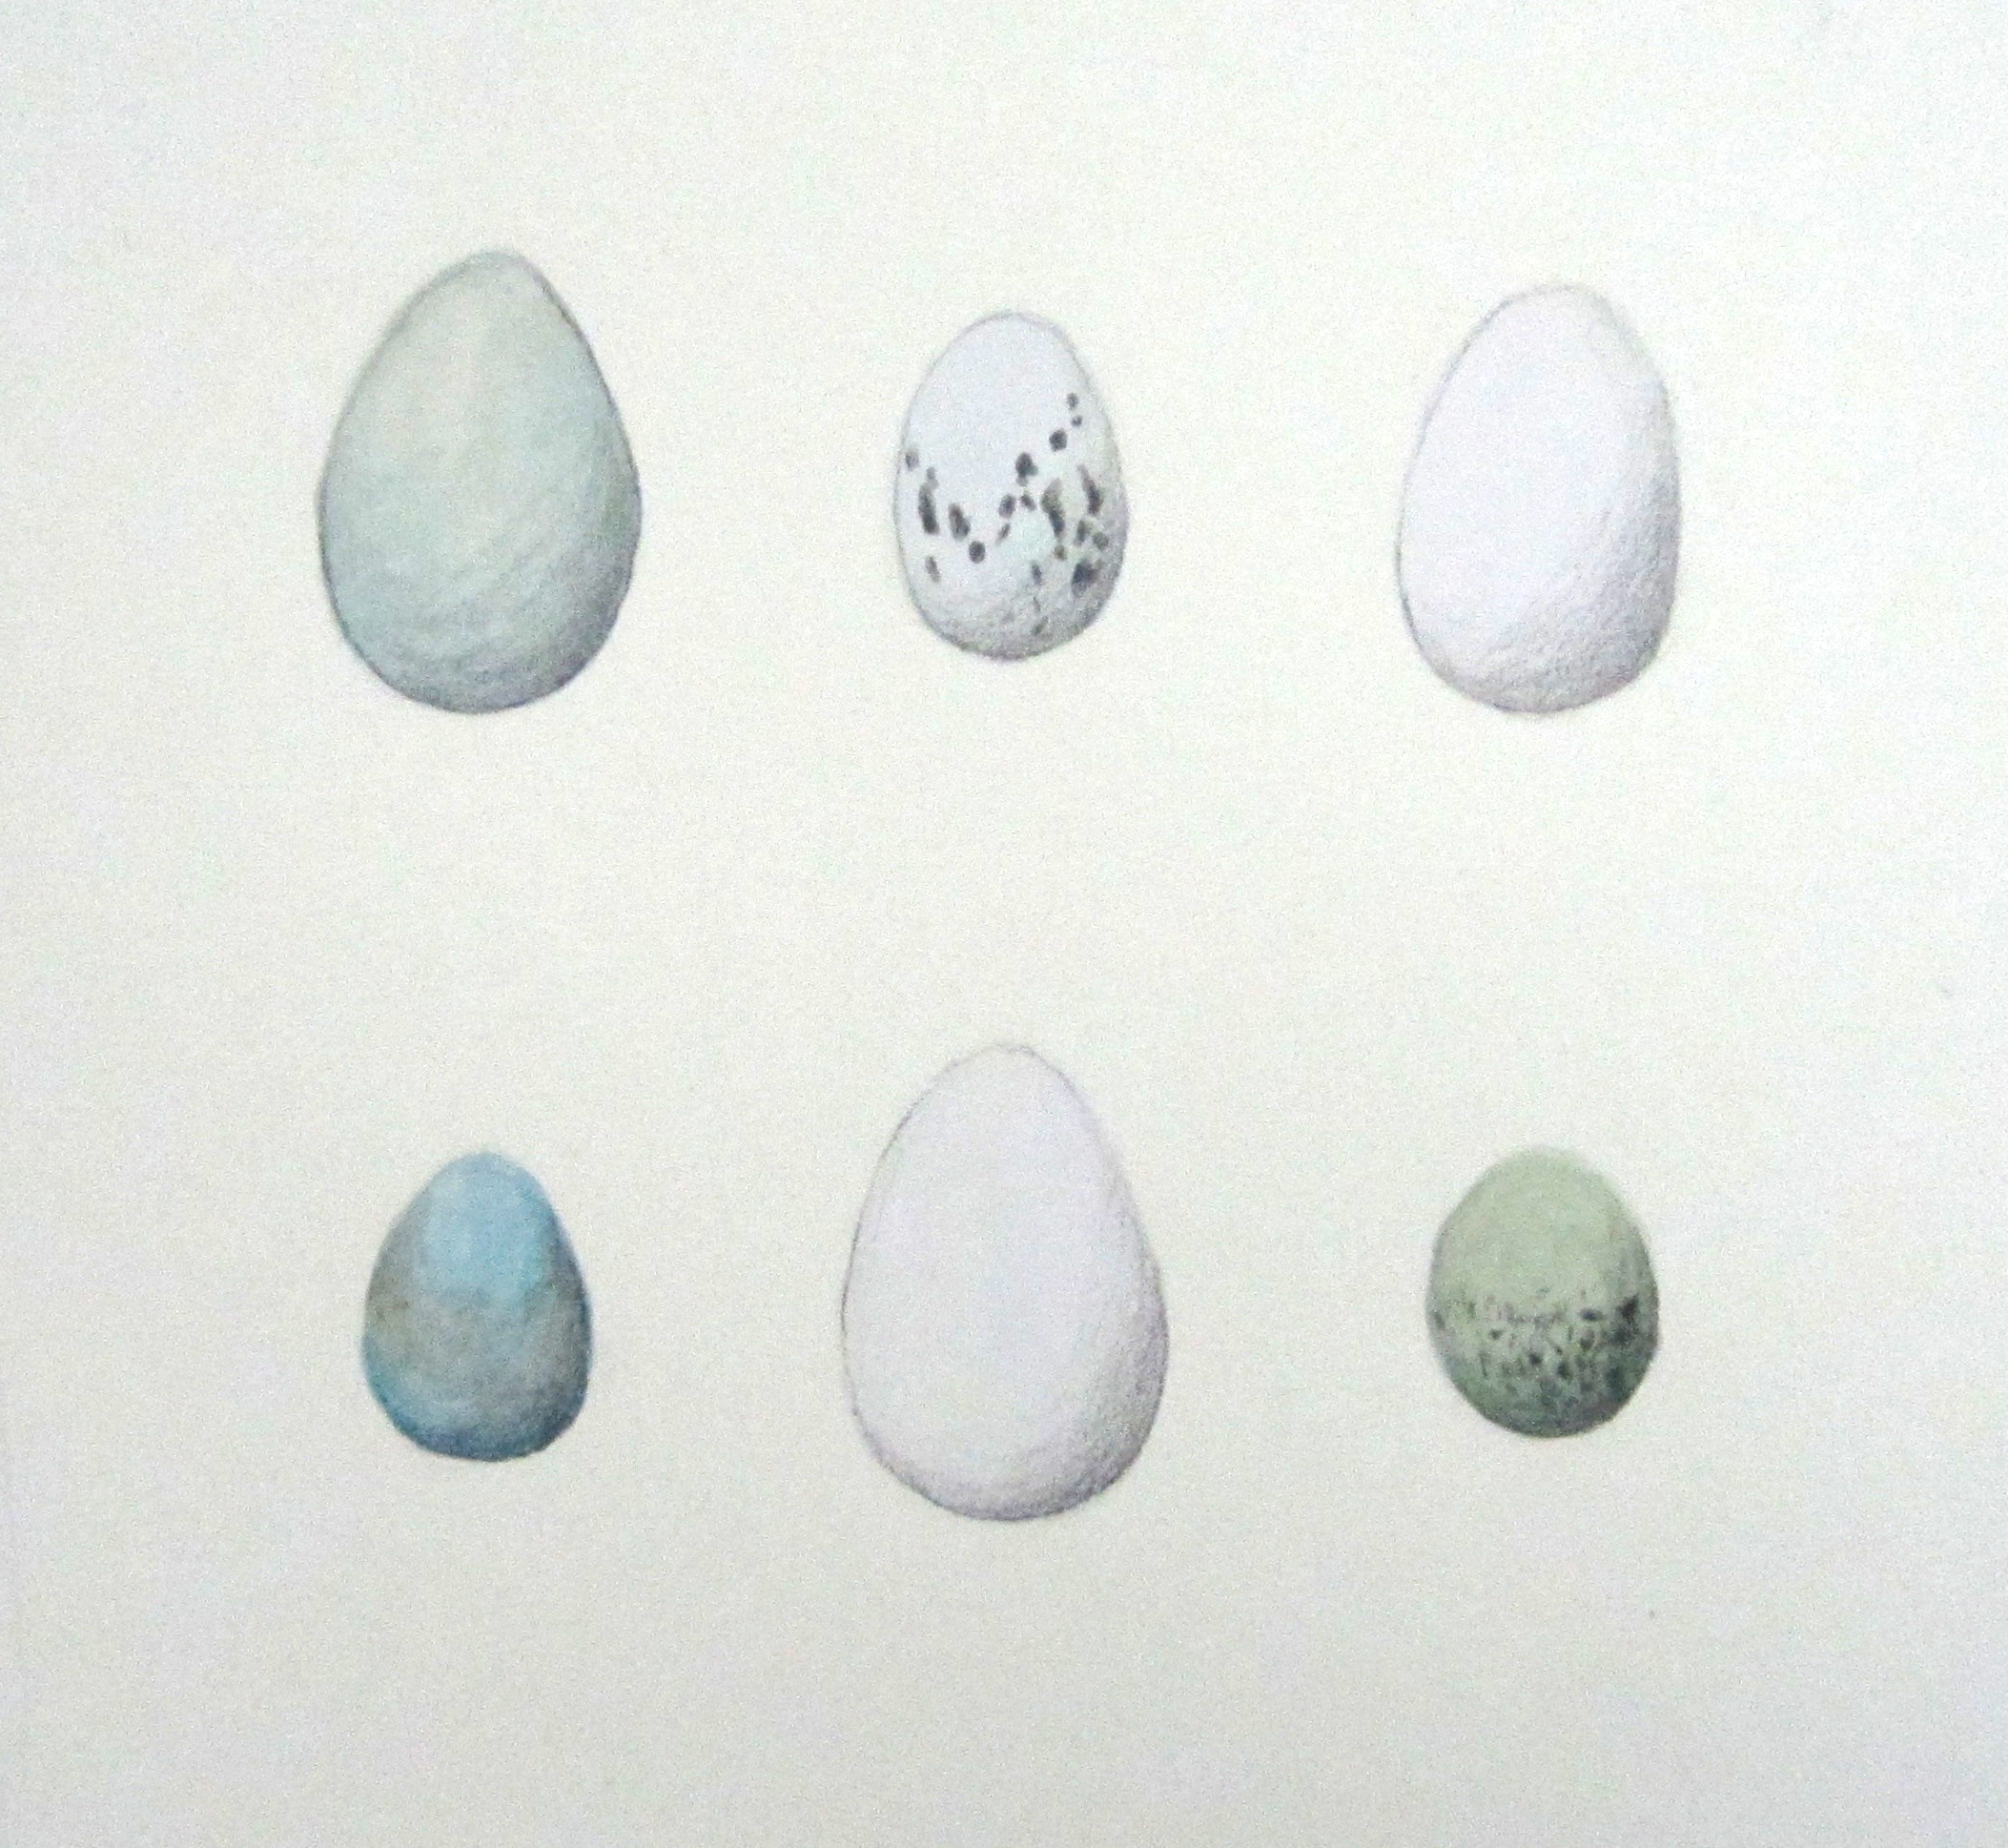 "Blue and White Birds' Eggs", watercolor and pencil, 8x8